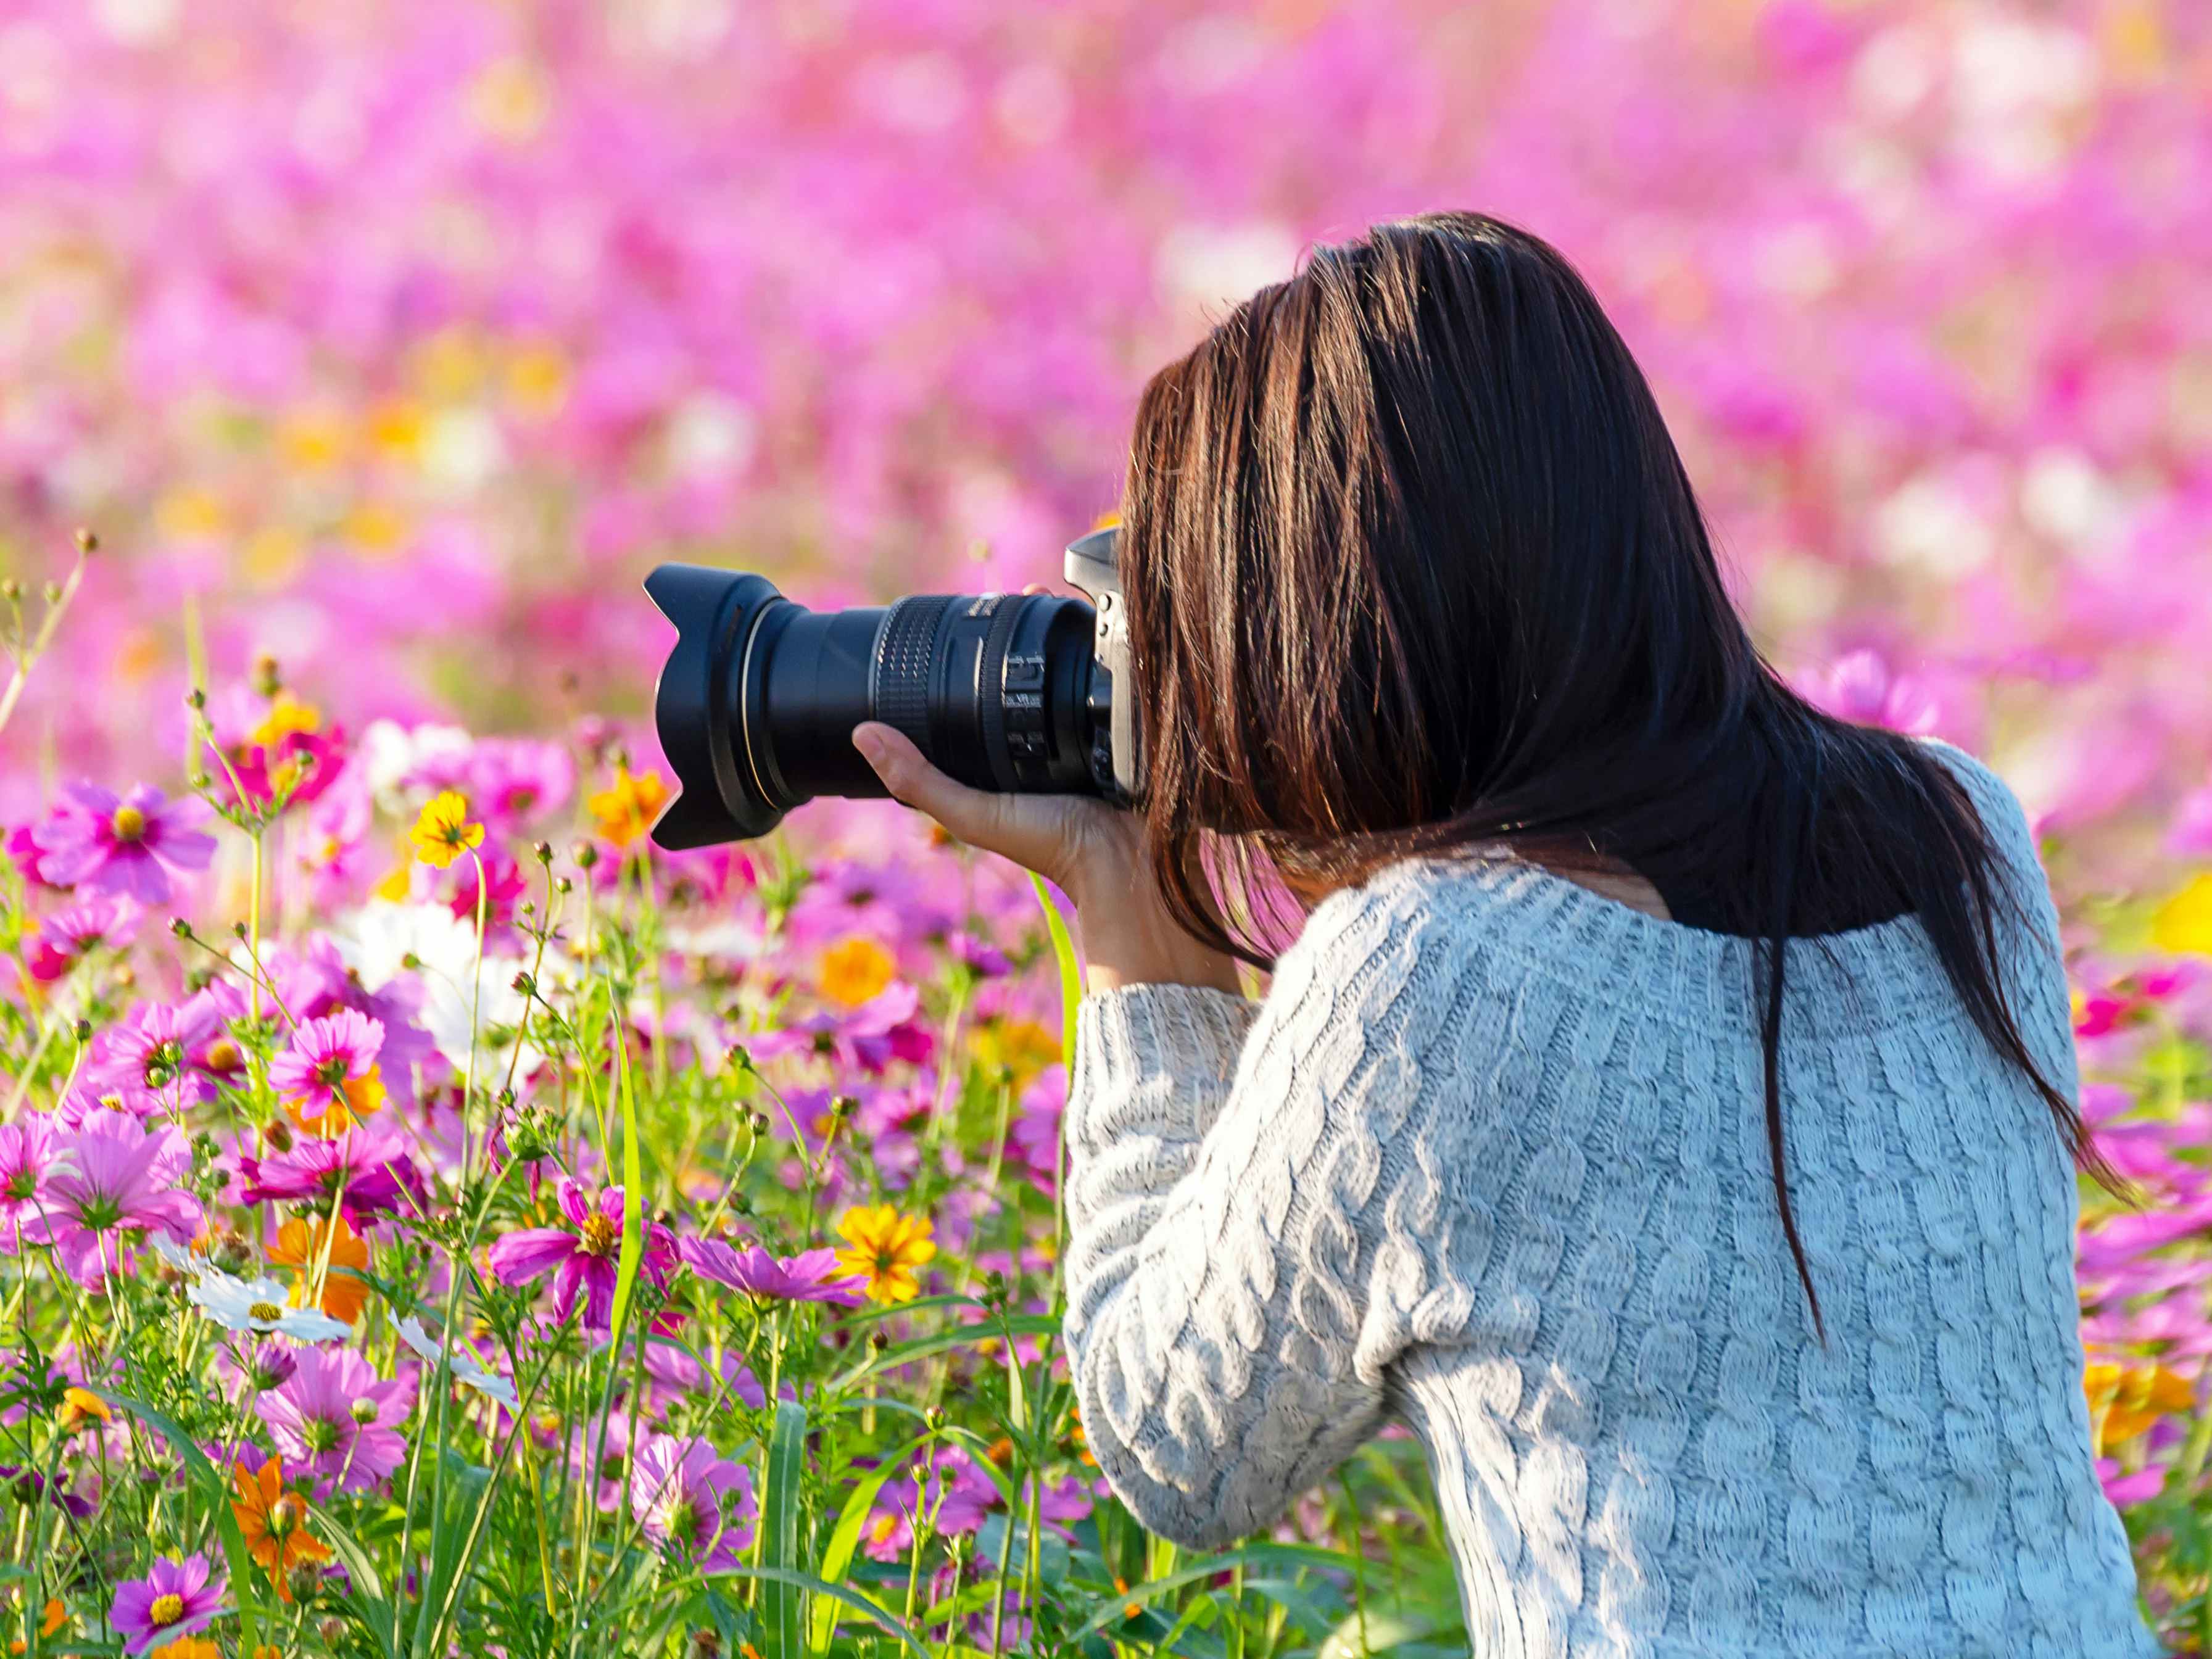 a person taking a photo in a flower field with a camera